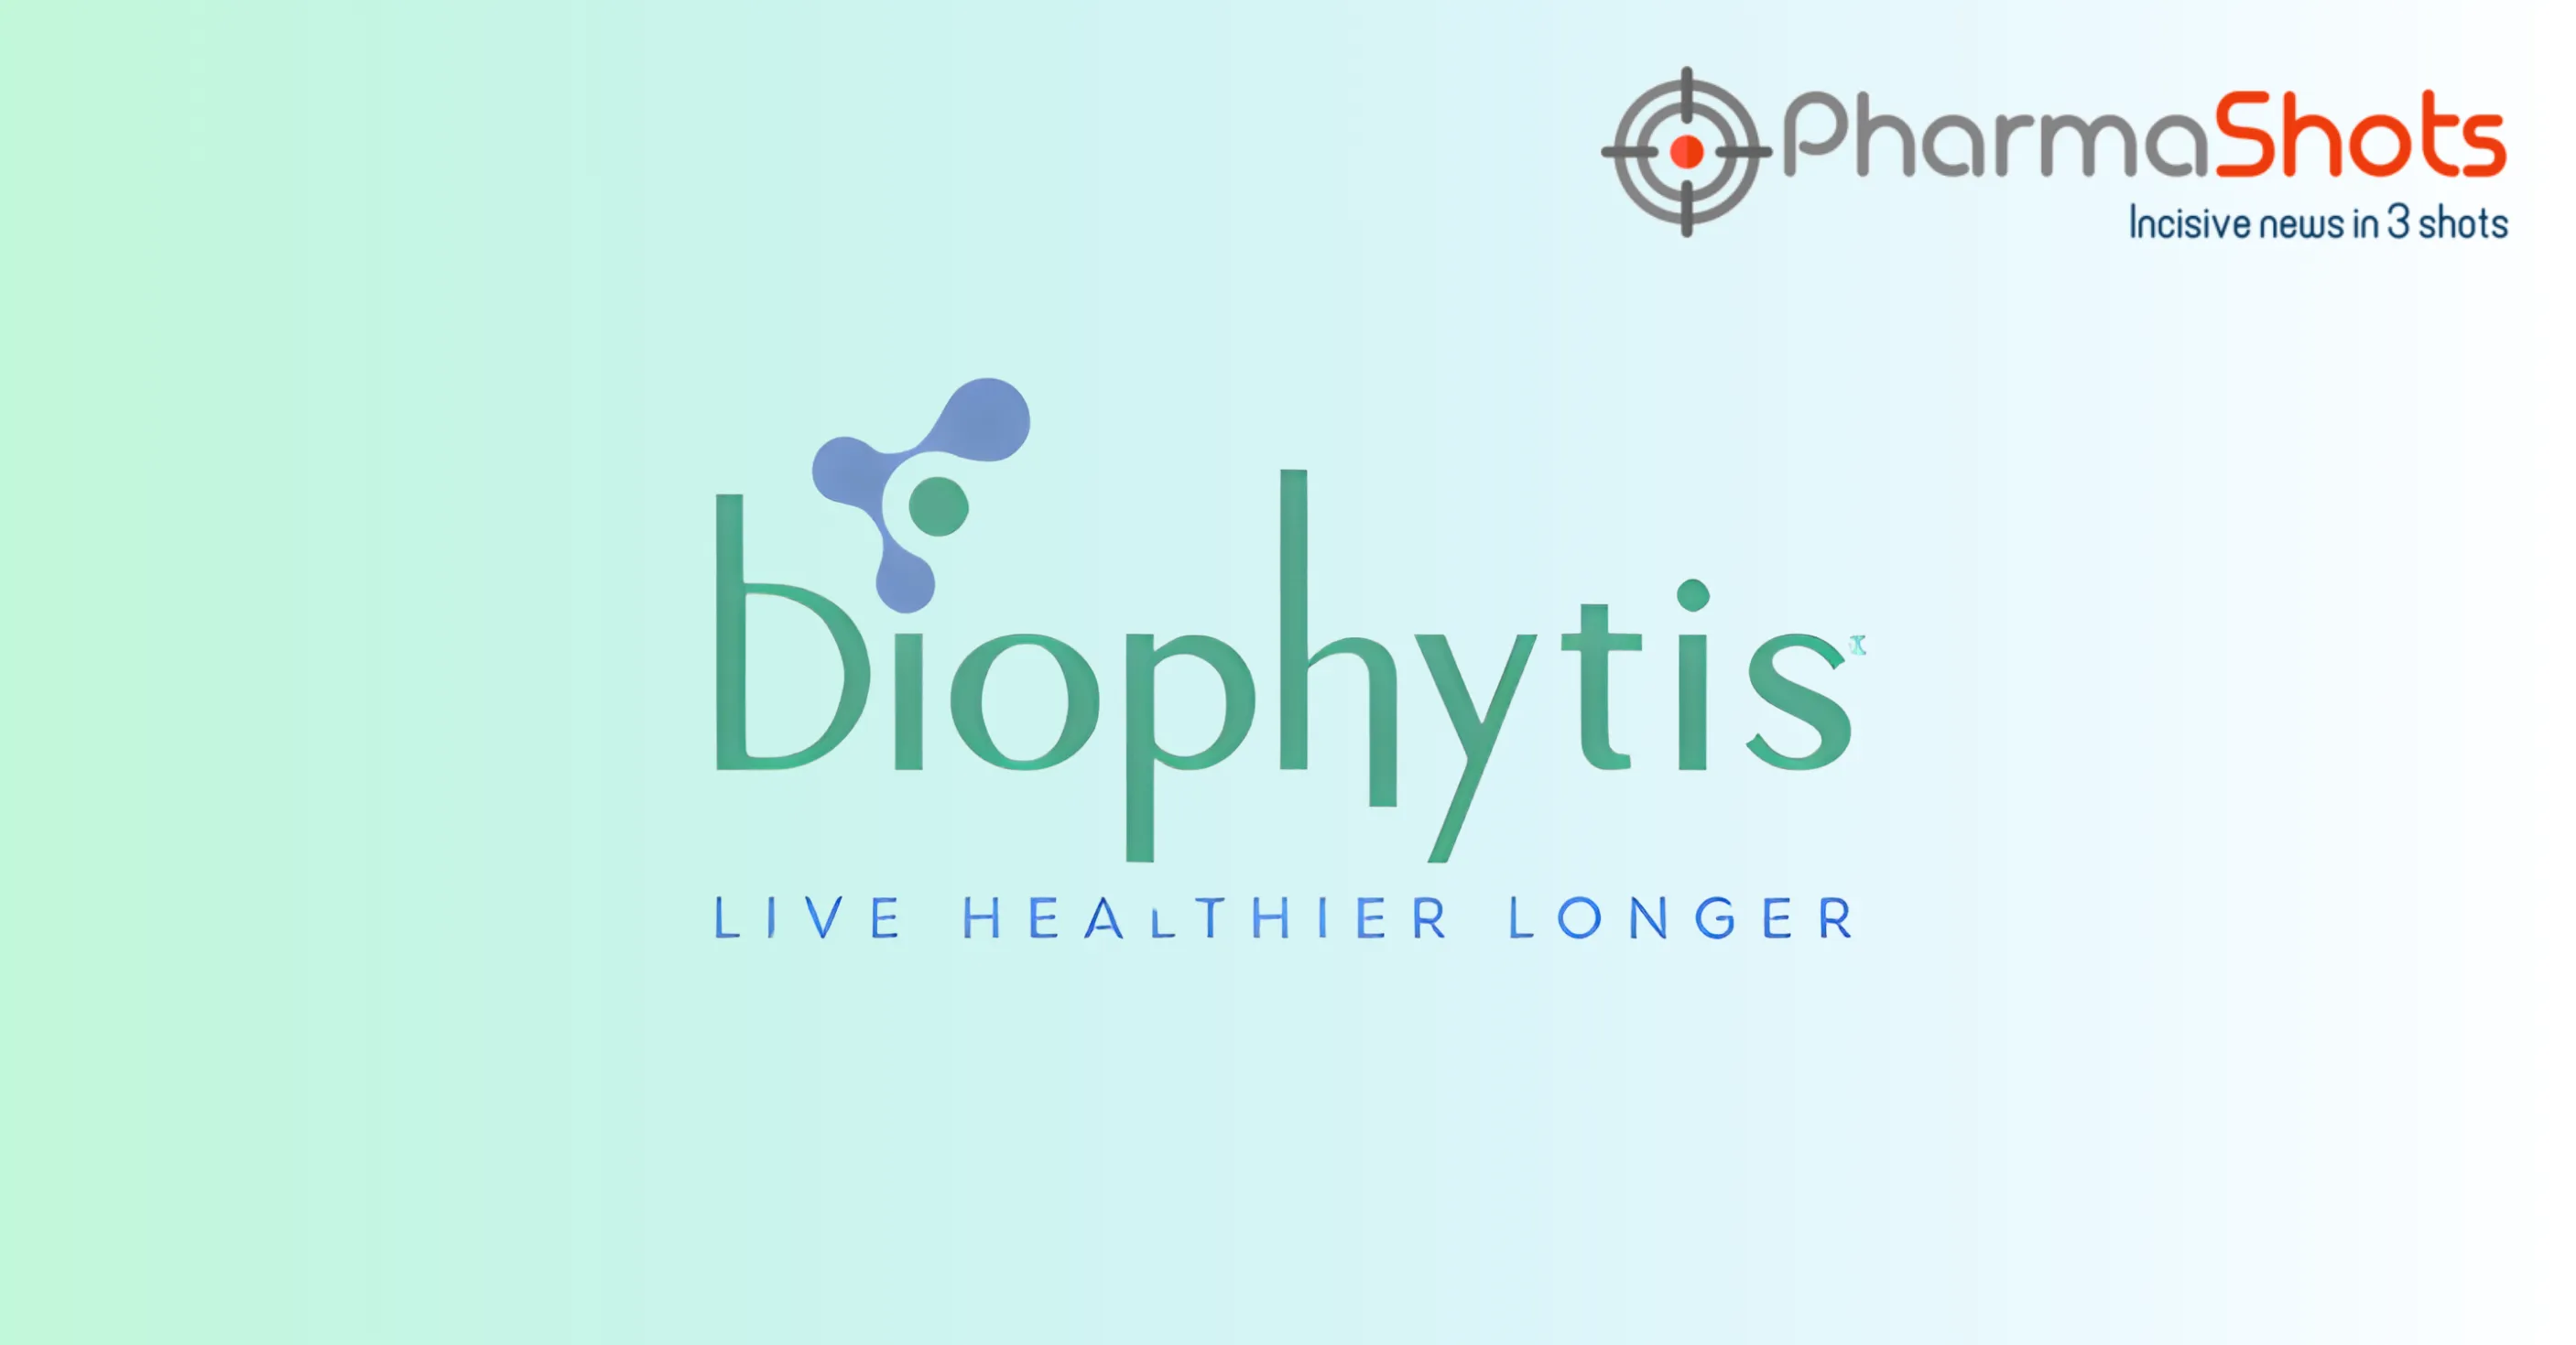 Biophytis Reports the US FDA’s IND Clearance to Initiate the P-II Trial of BIO101 for Treating Obesity